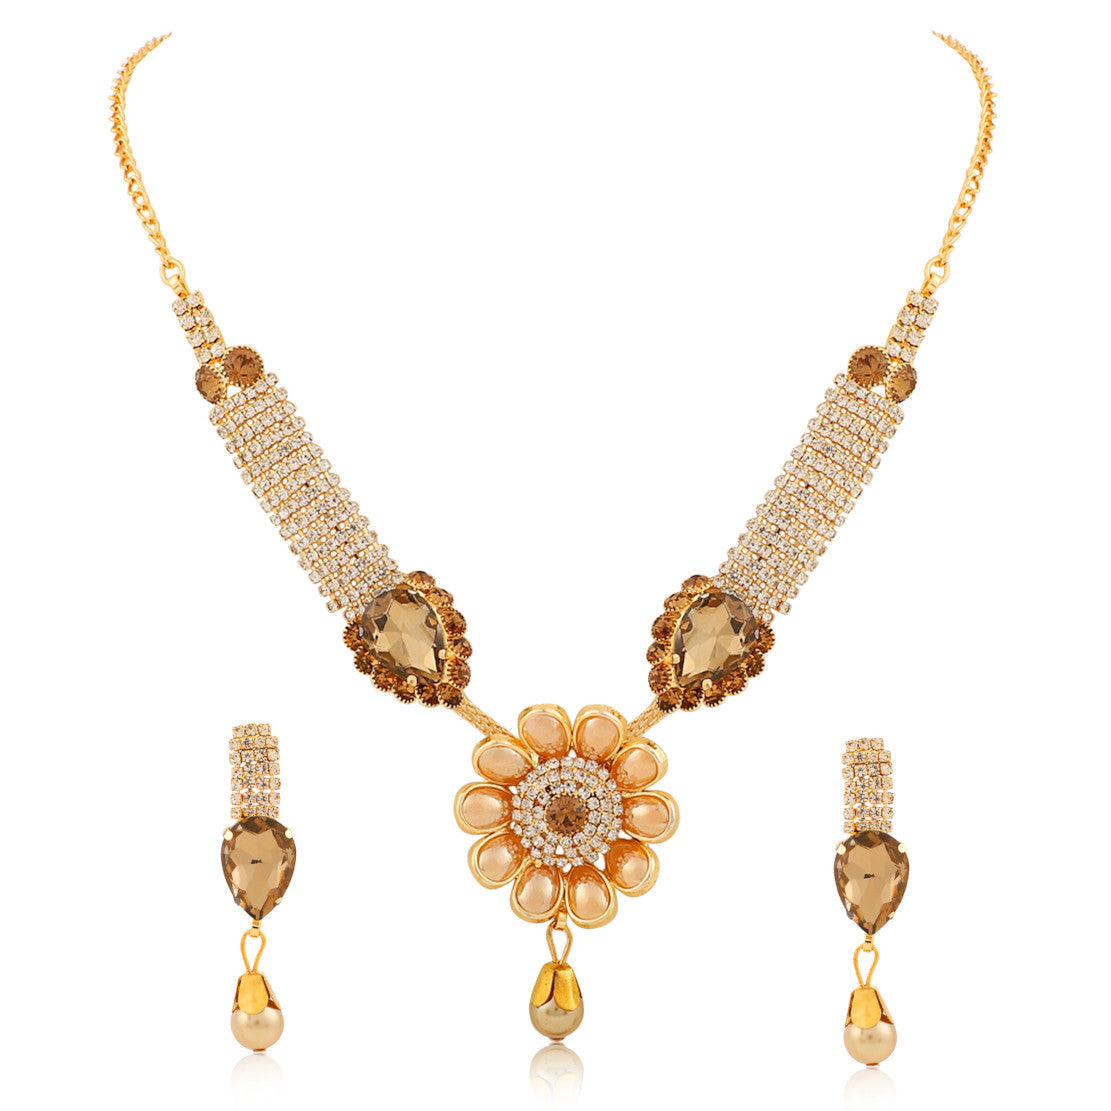 Traditional Designed by Handcrafted Big Stone Necklace with Earrings for Women | Buy This Necklace Online from Mekkna